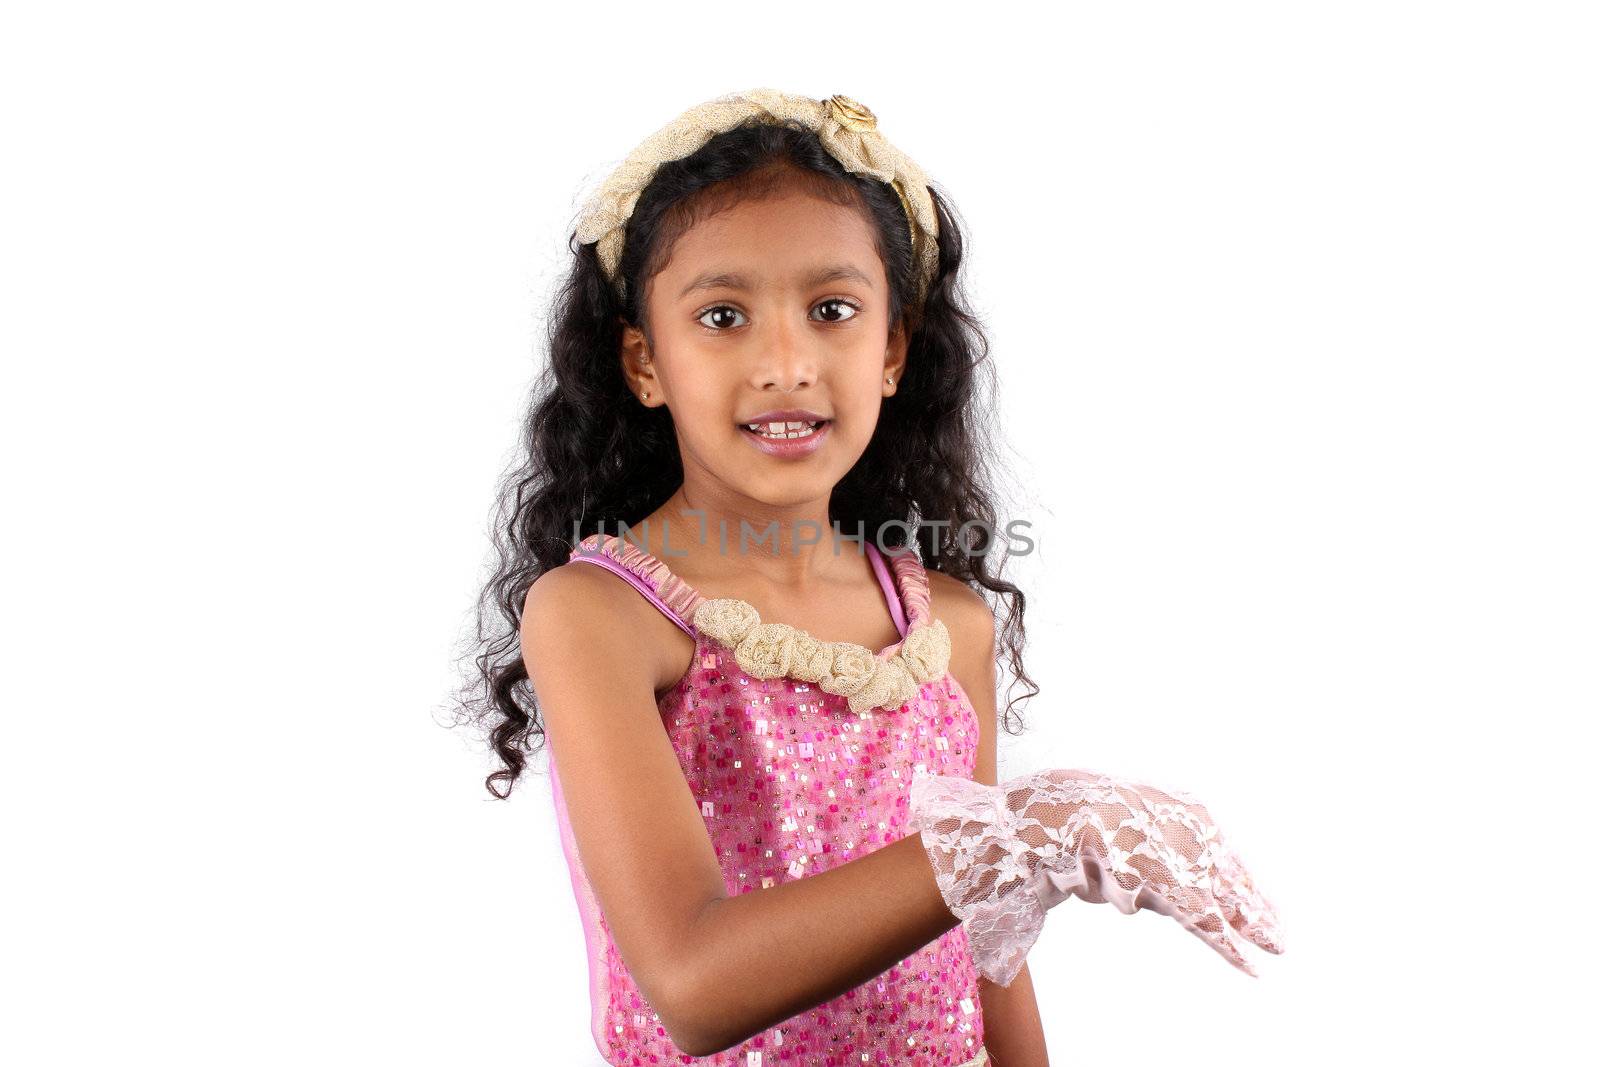 An Indian child actress wearing a pink frock and white gloves practicing her scene, on white studio background.